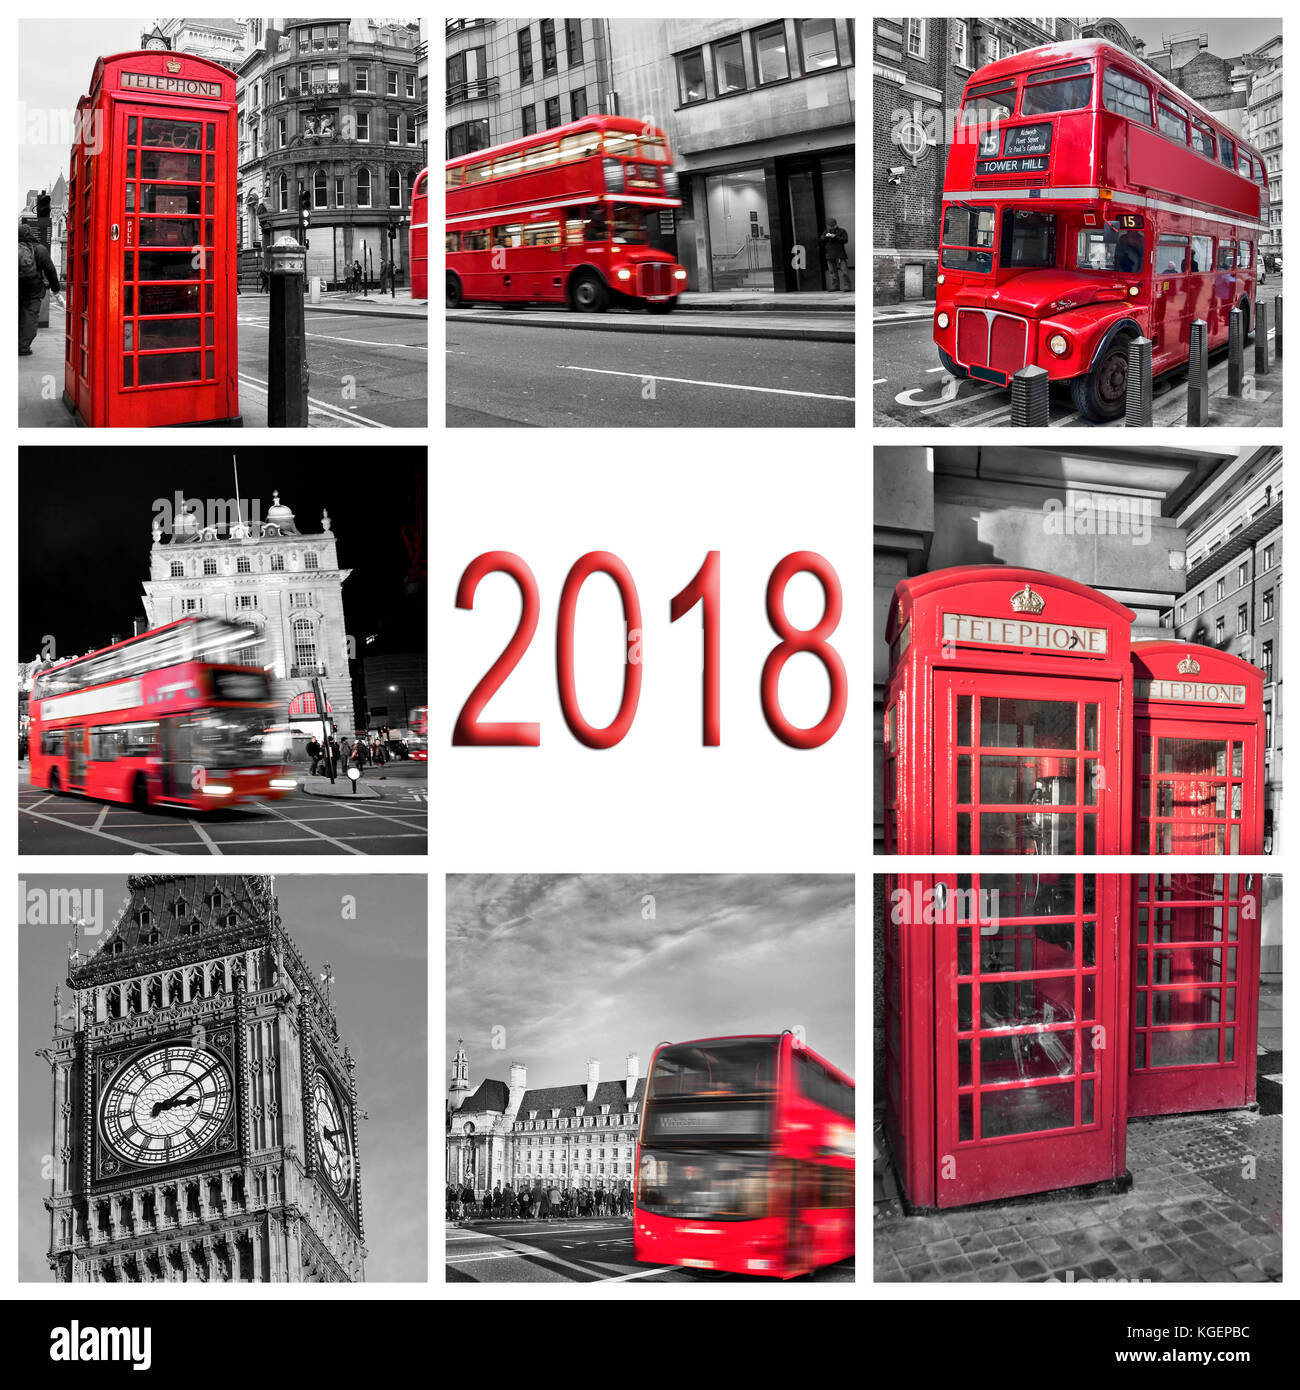 2018, London travel photos collage, black and white and red selective color Stock Photo